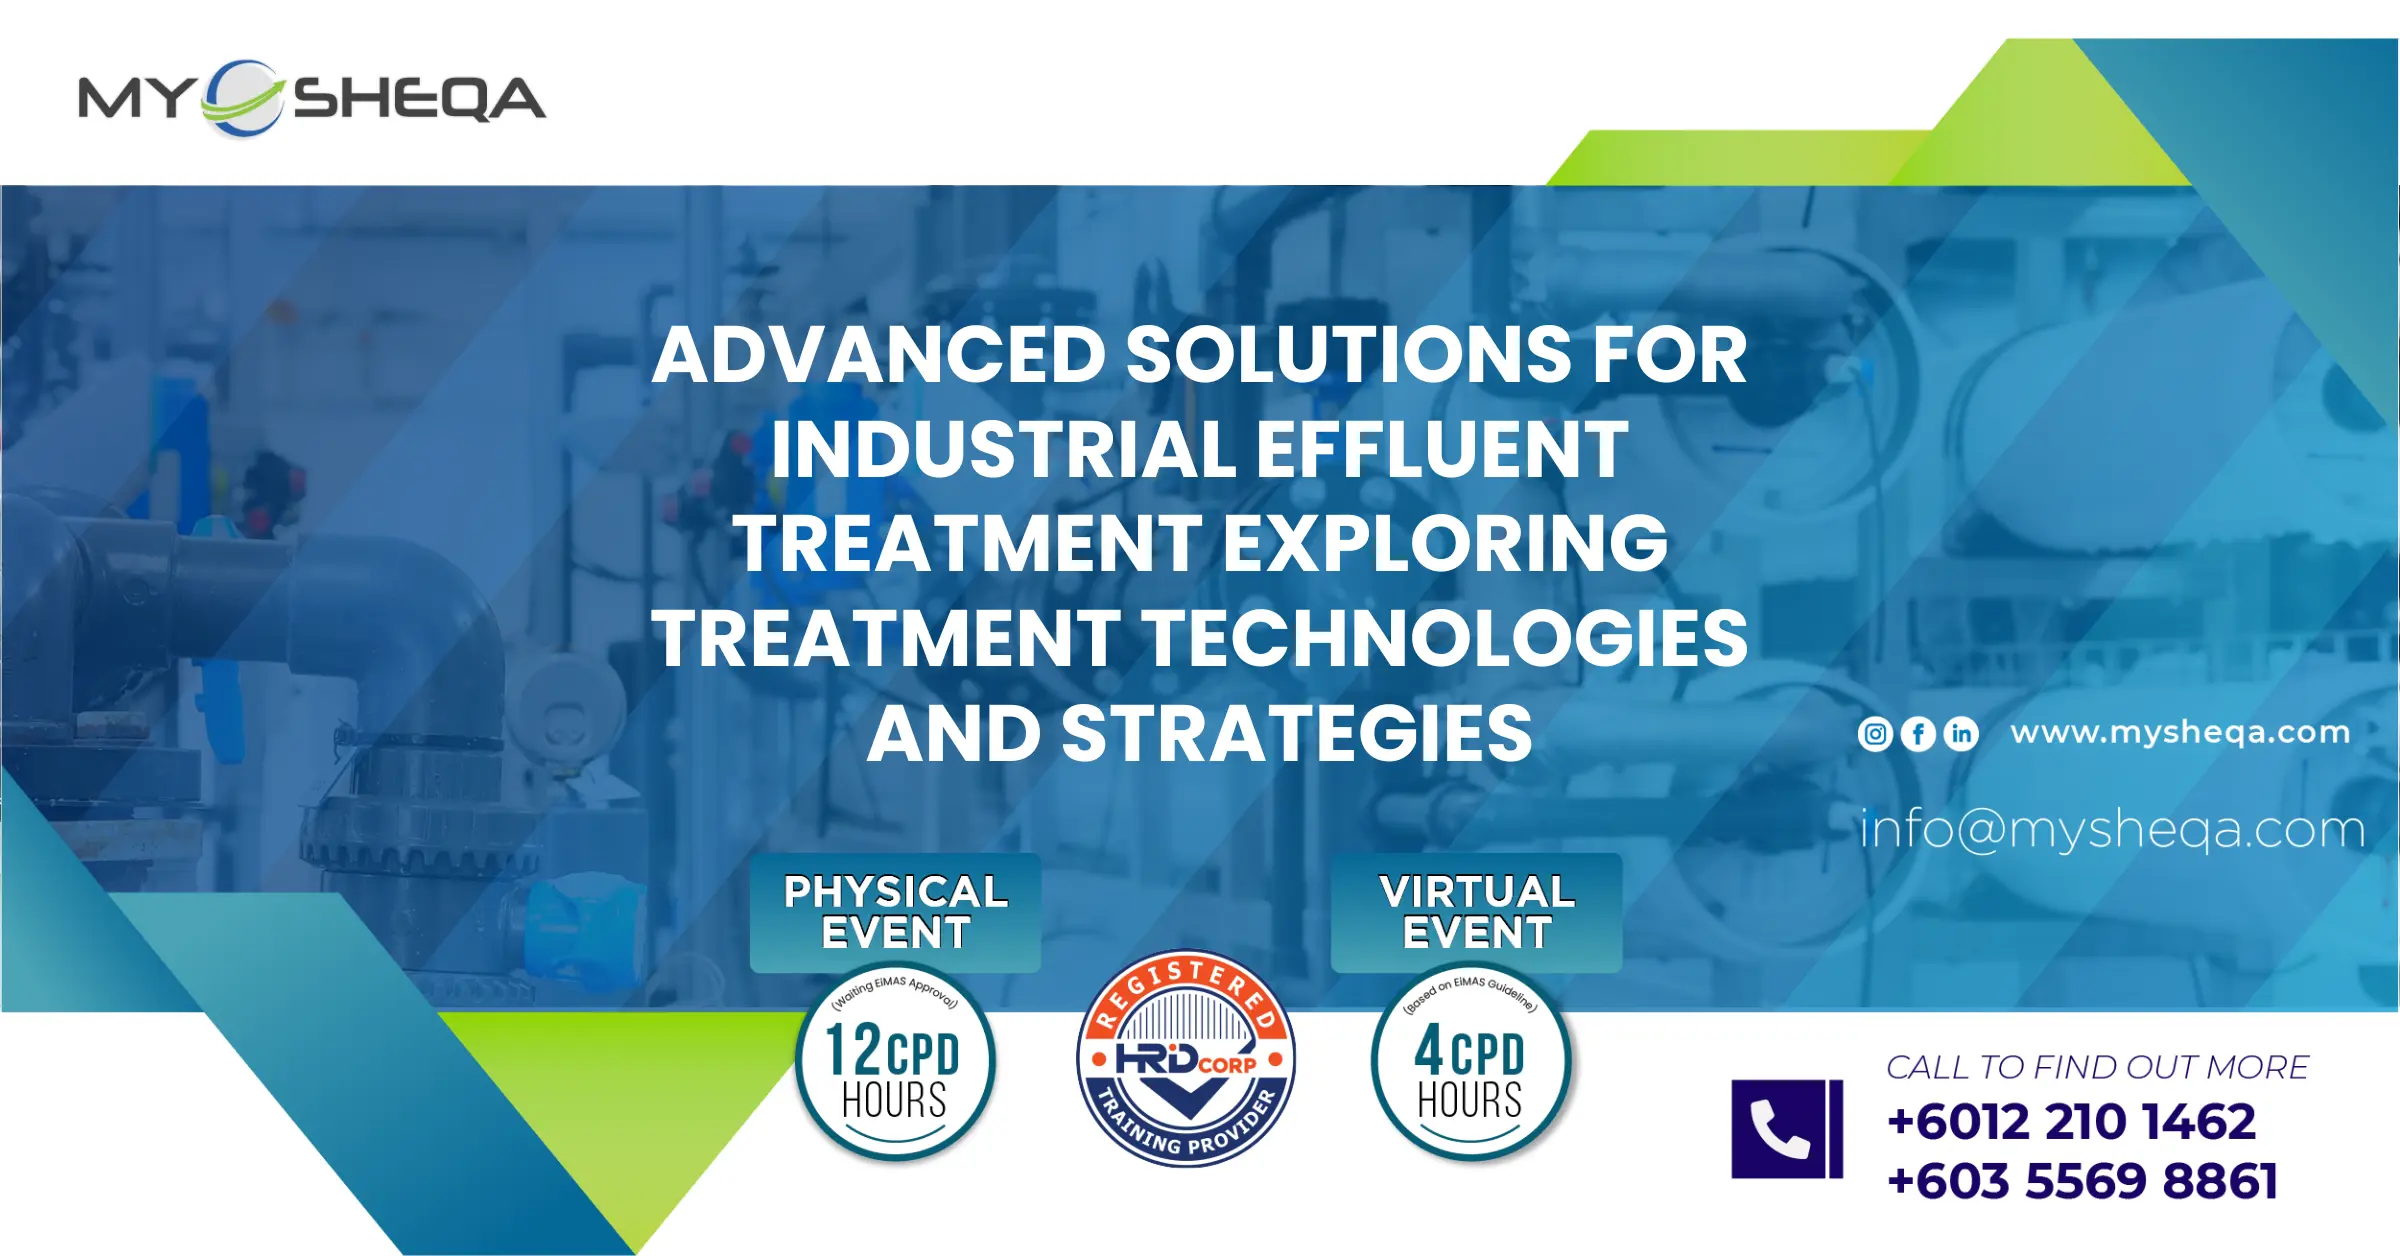 Advanced Solutions for Industrial Effluent Treatment Exploring Treatment Technologies and Strategies